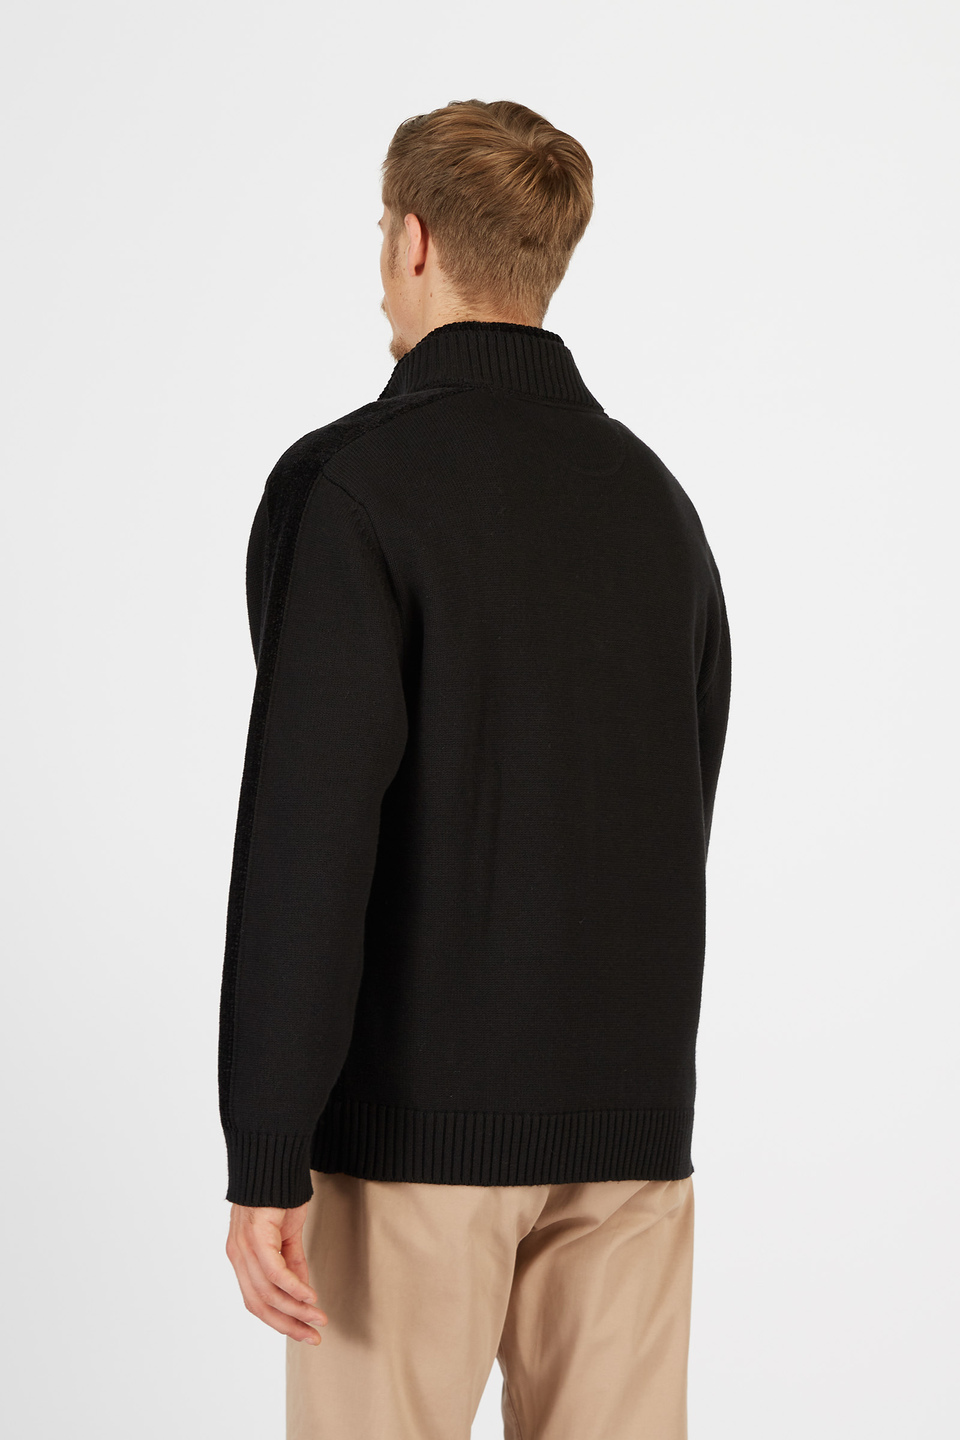 Men’s knit sweater with long sleeves in cotton and wool blend comfort fit | La Martina - Official Online Shop